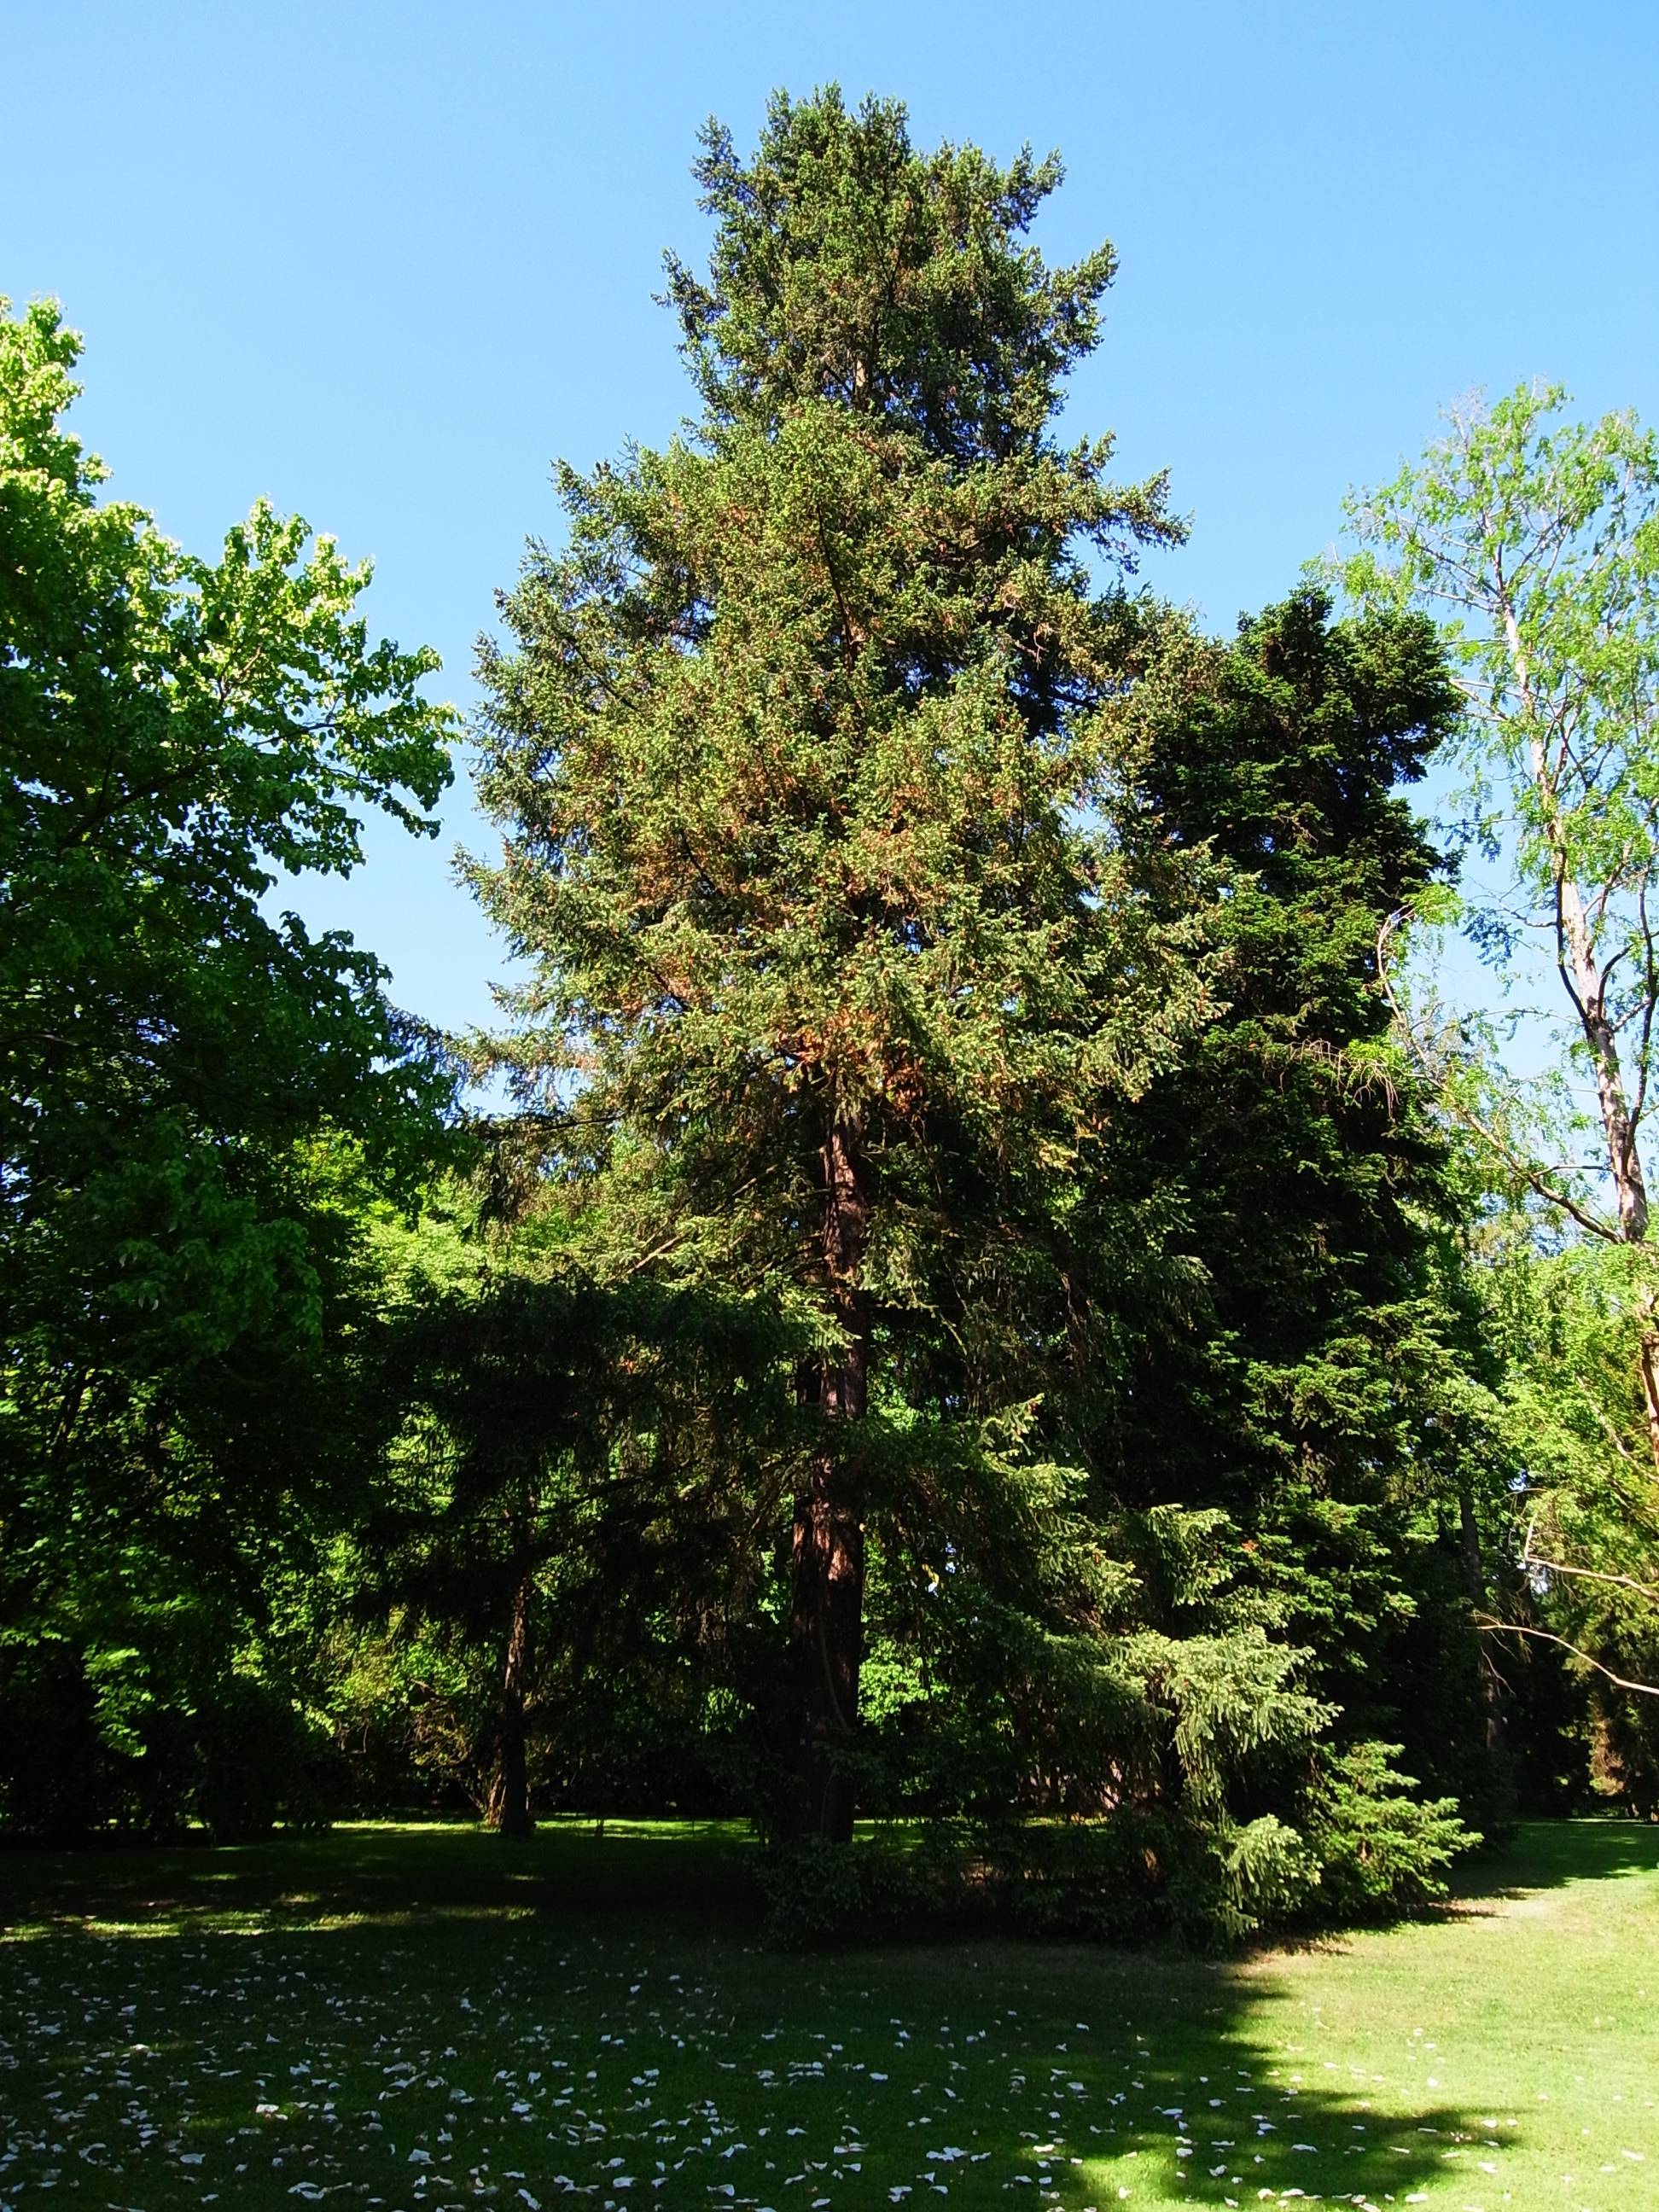 dense, pyramidal tree with dark green, glossy leaves and brown trunk 